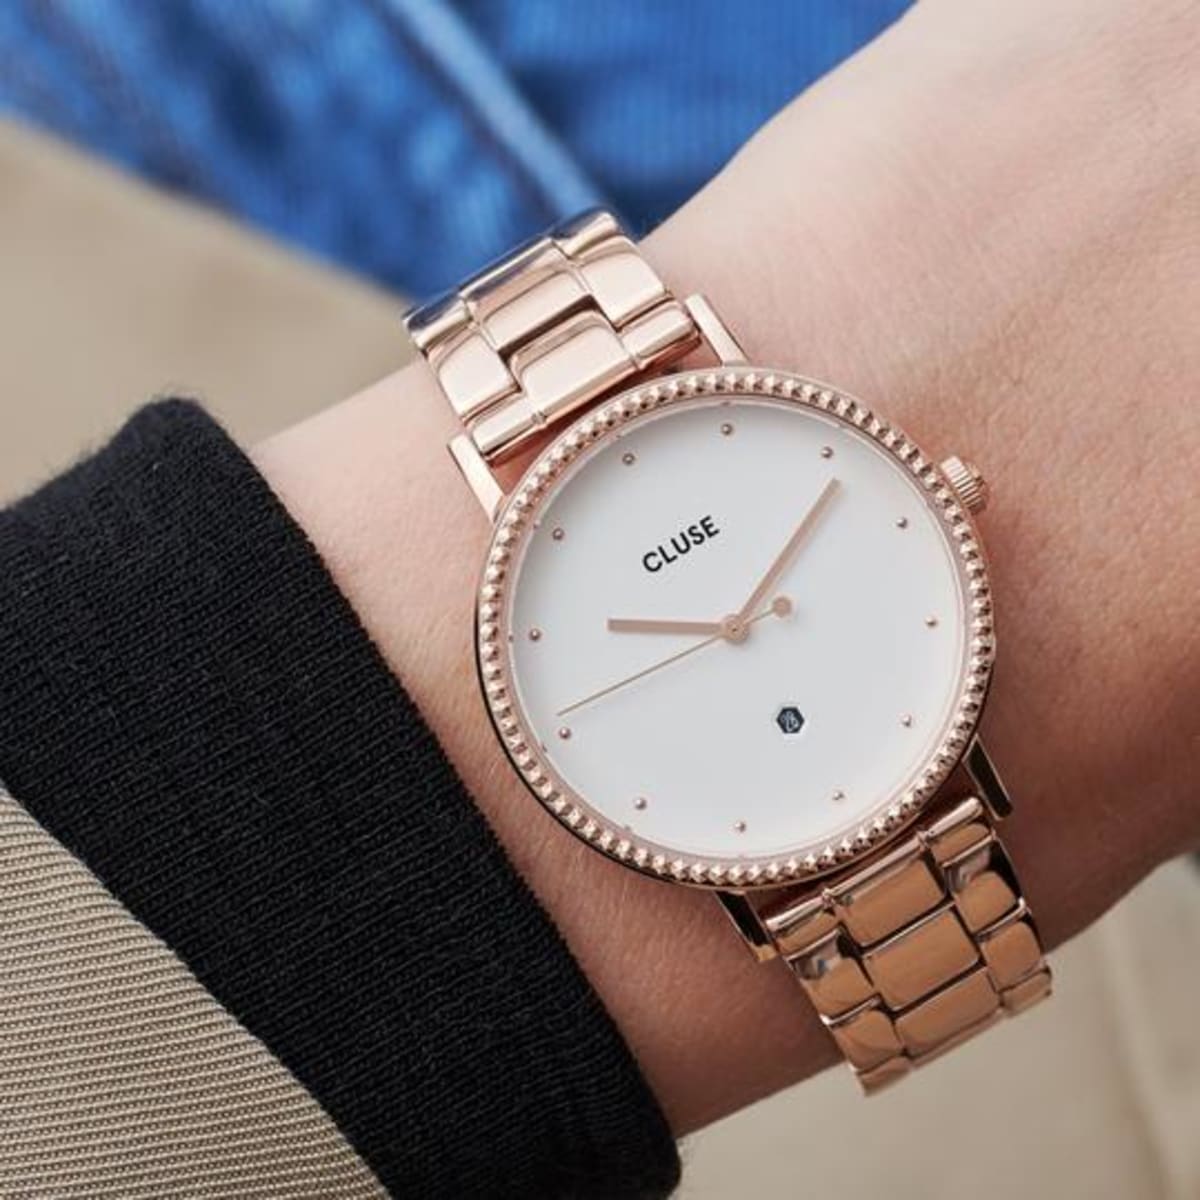 Inspired by romantic encounters, date nights and magical rendezvous. Le Couronnement is our first watch featuring a date function, stylishly set in a black hexagon on the dial. The case is bordered with faceted hexagons adding a unique texture to the watch. This rose gold coloured watch features a chic 16 mm highly polished 3-link strap. As with all our CLUSE watches, our Le Couronnement range is easily interchangeable with any other CLUSE straps of the same size.